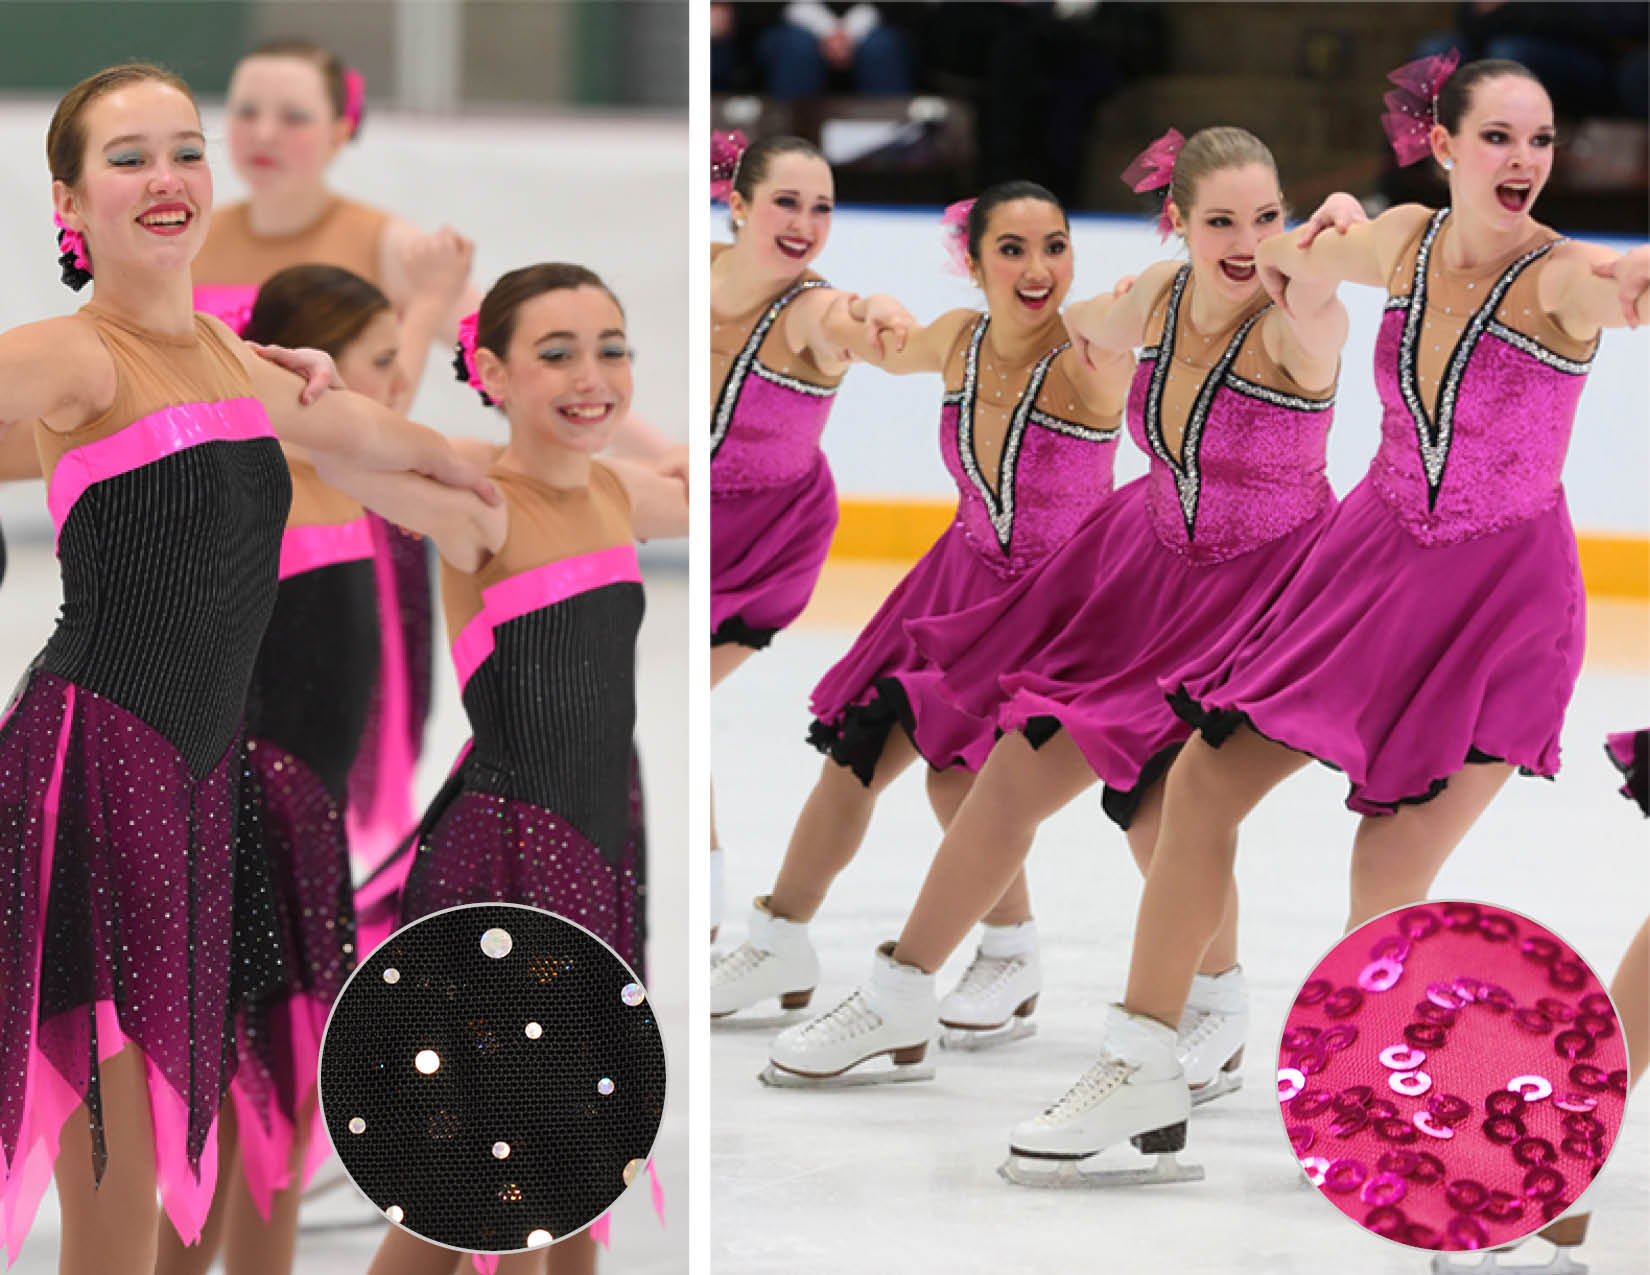 Your Complete Guide to the USFSA Synchronized Skating Costume Guidelines